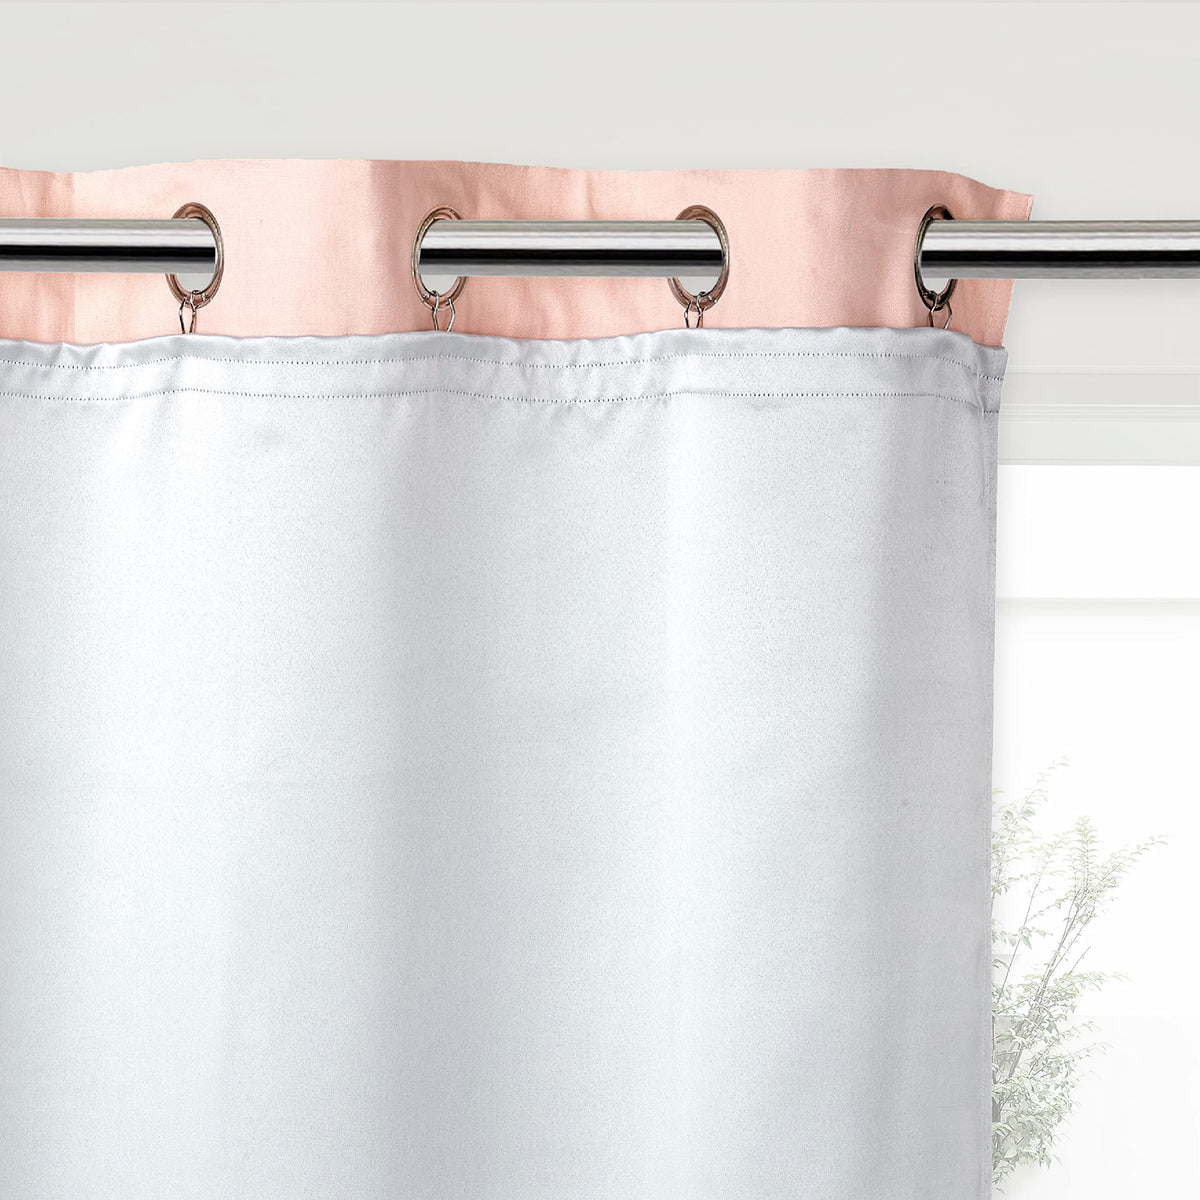 Encasa Blackout Curtain Liners for 9 ft Long Door Curtains - Noise Reducing, Light Blocking | Set of 2 with 16 Hooks, Silver White | Attach to Existing Curtains